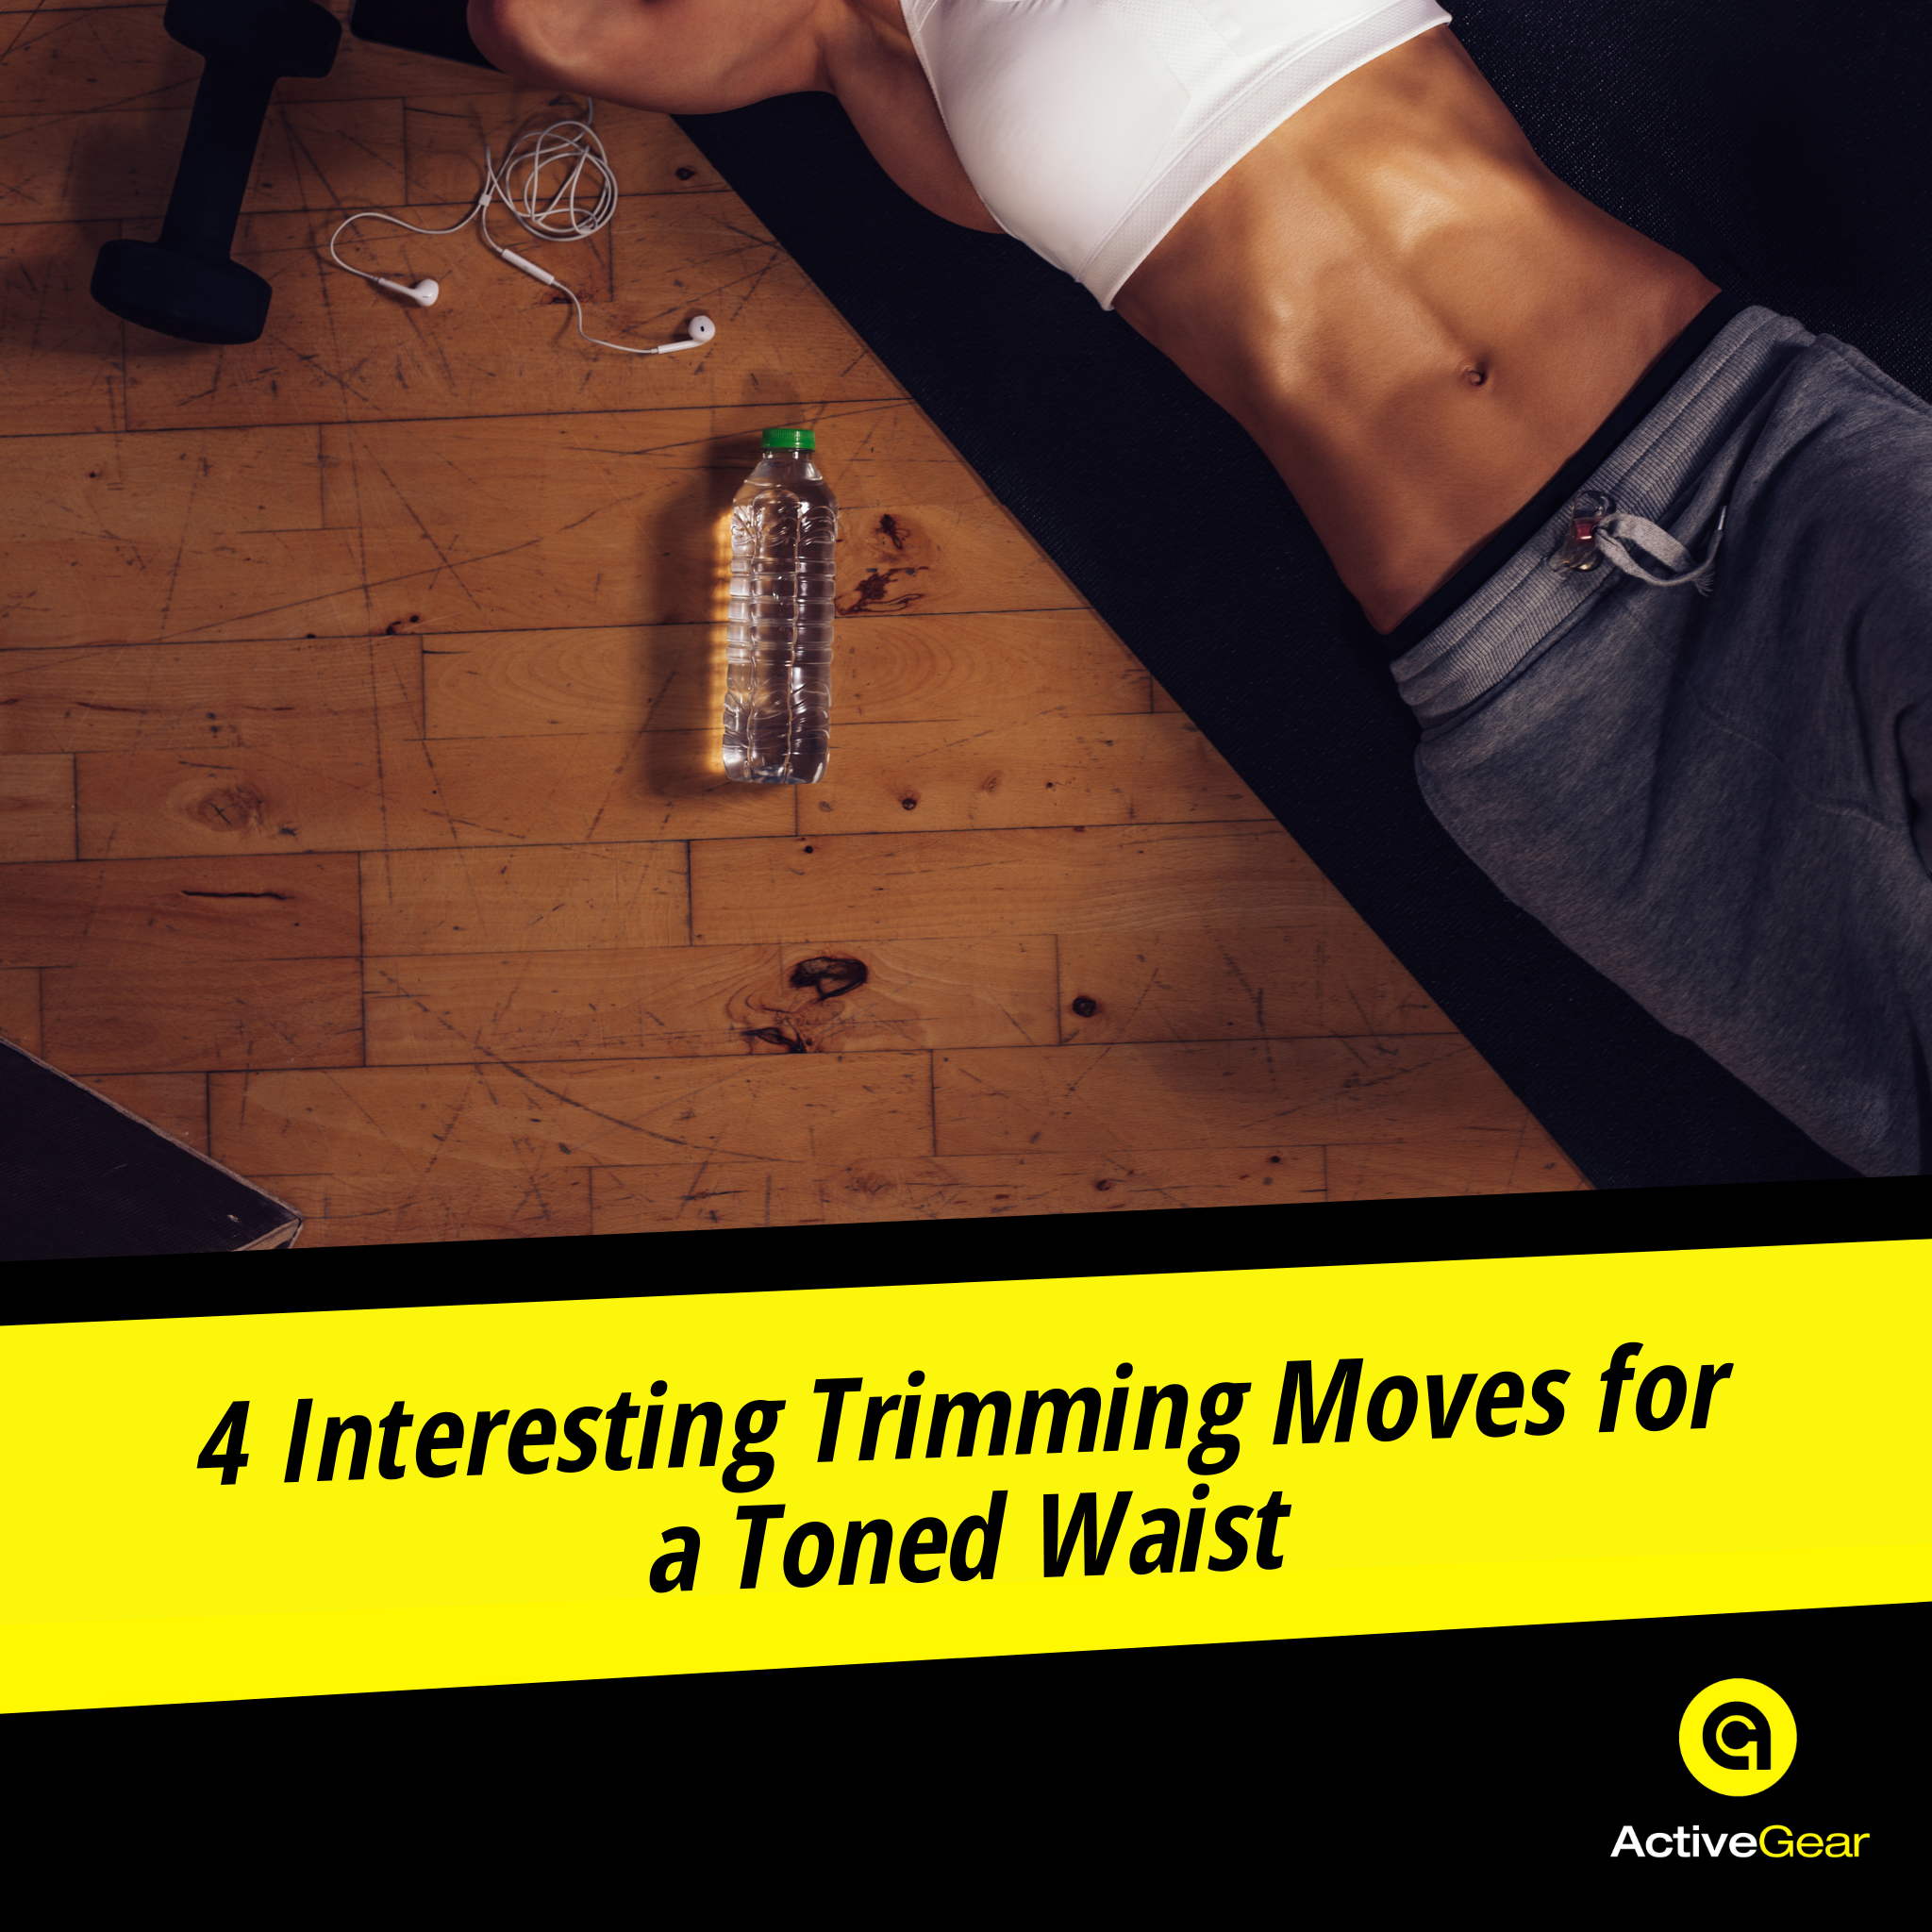 4 Interesting Trimming Moves for a Toned Waist – ActiveGear